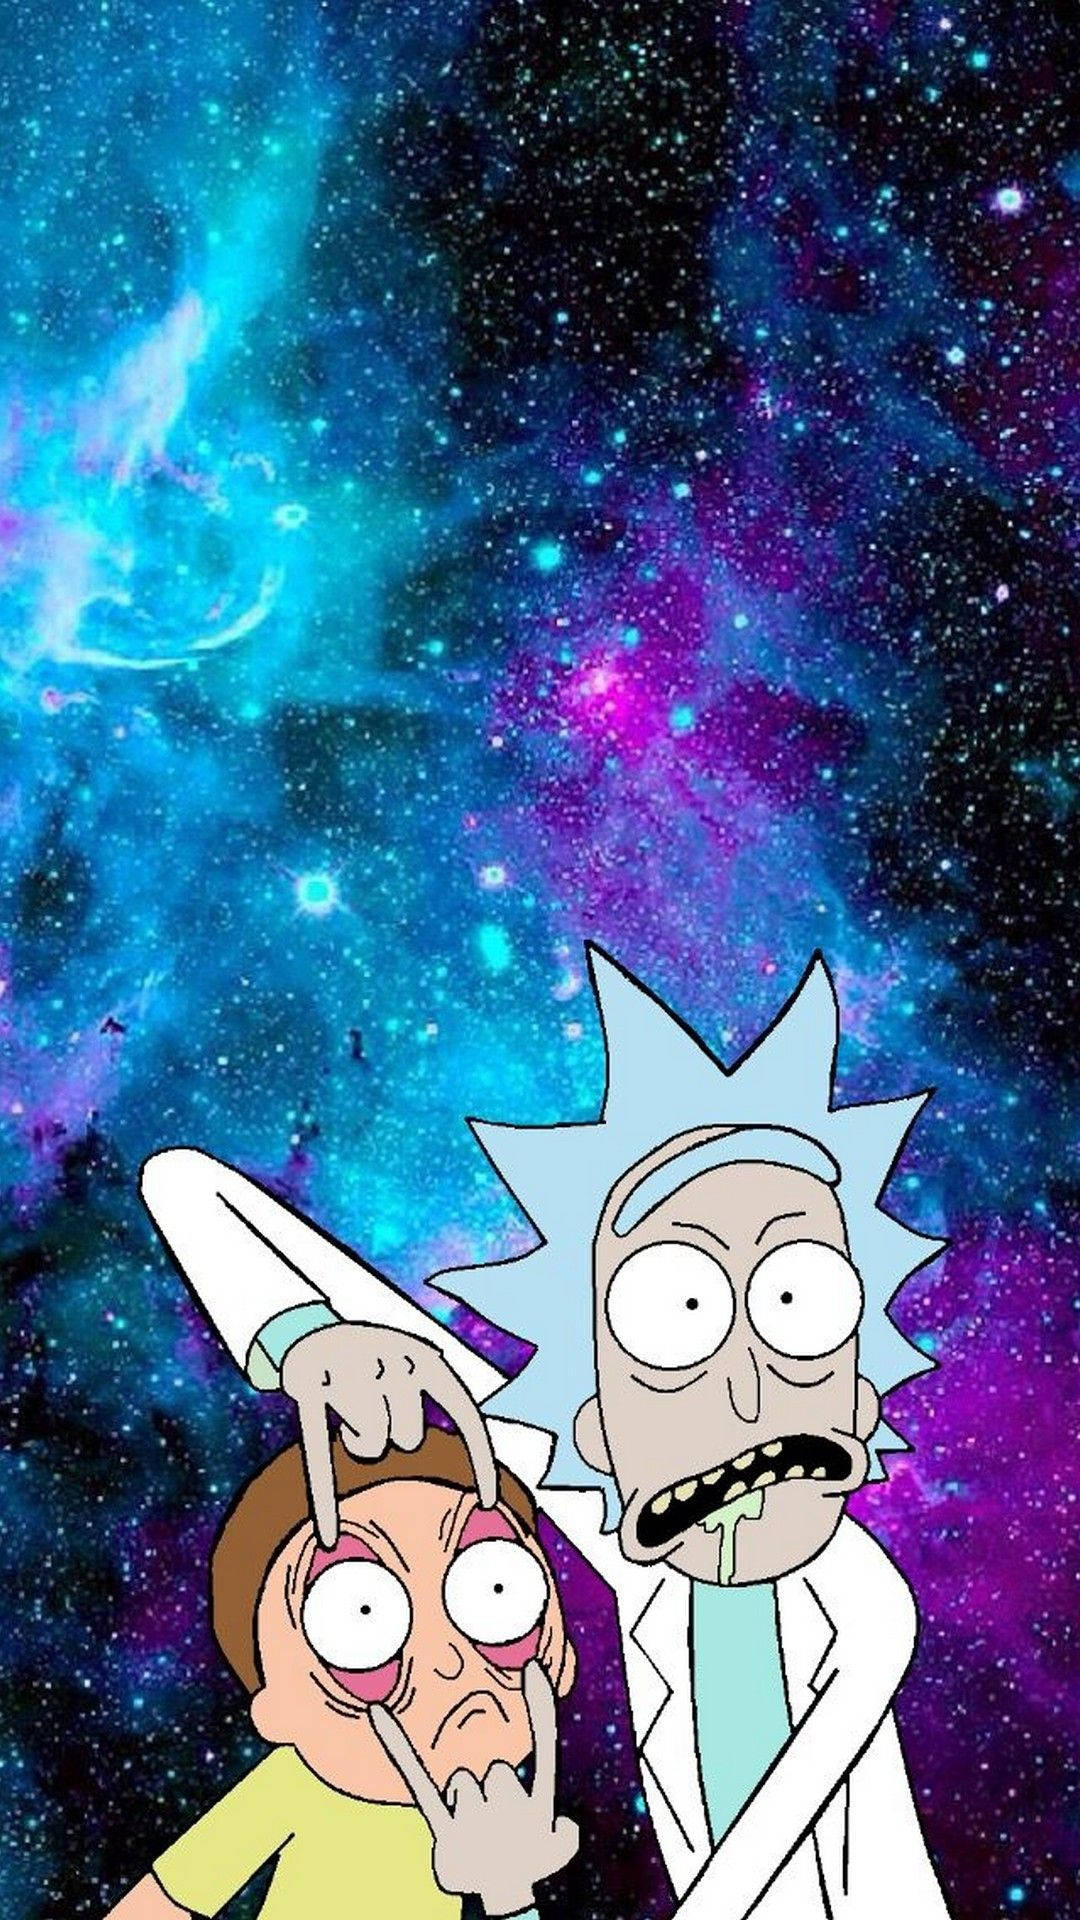 200+] Rick And Morty Iphone Wallpapers 